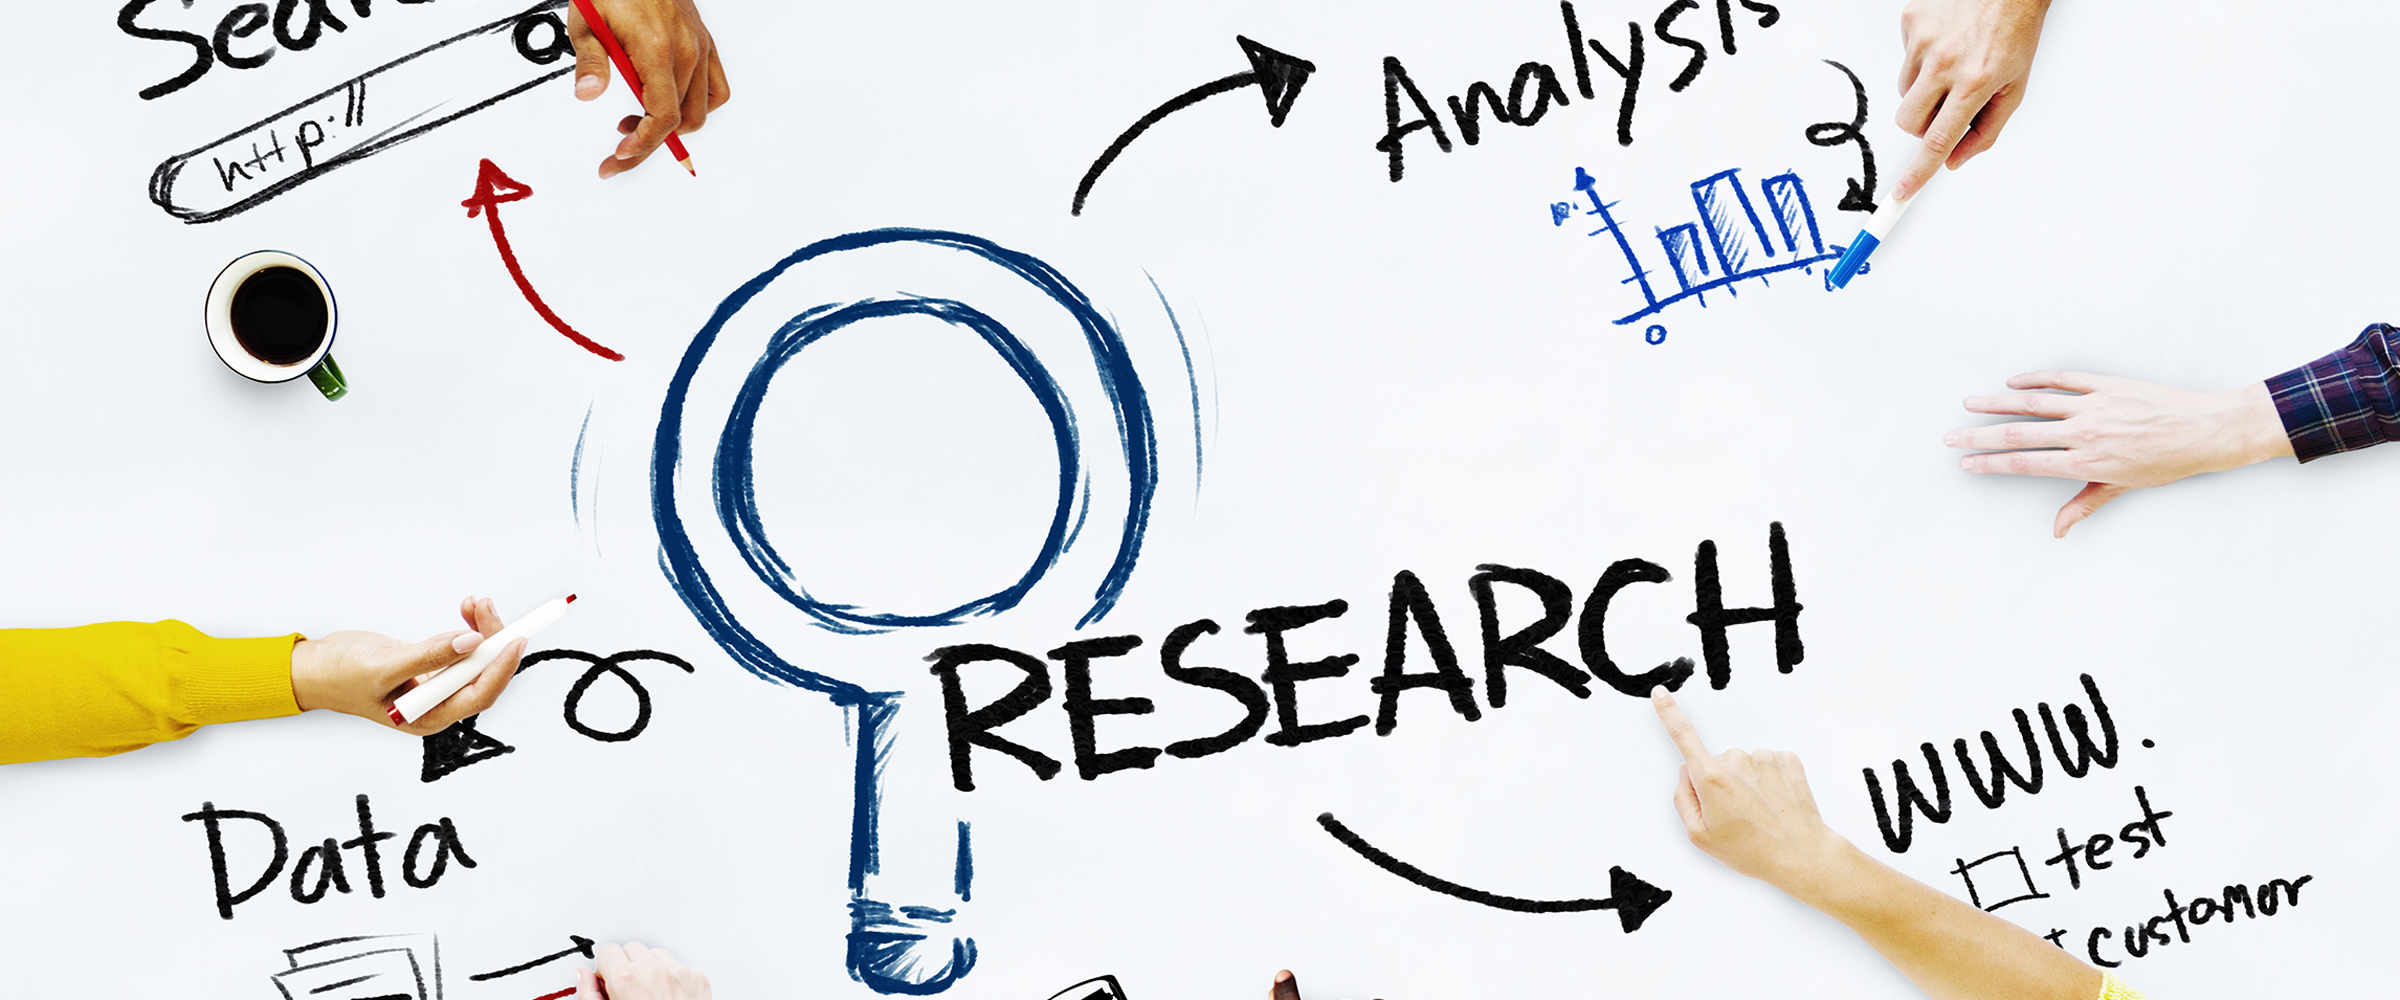 A look into Marketing Research for a Business